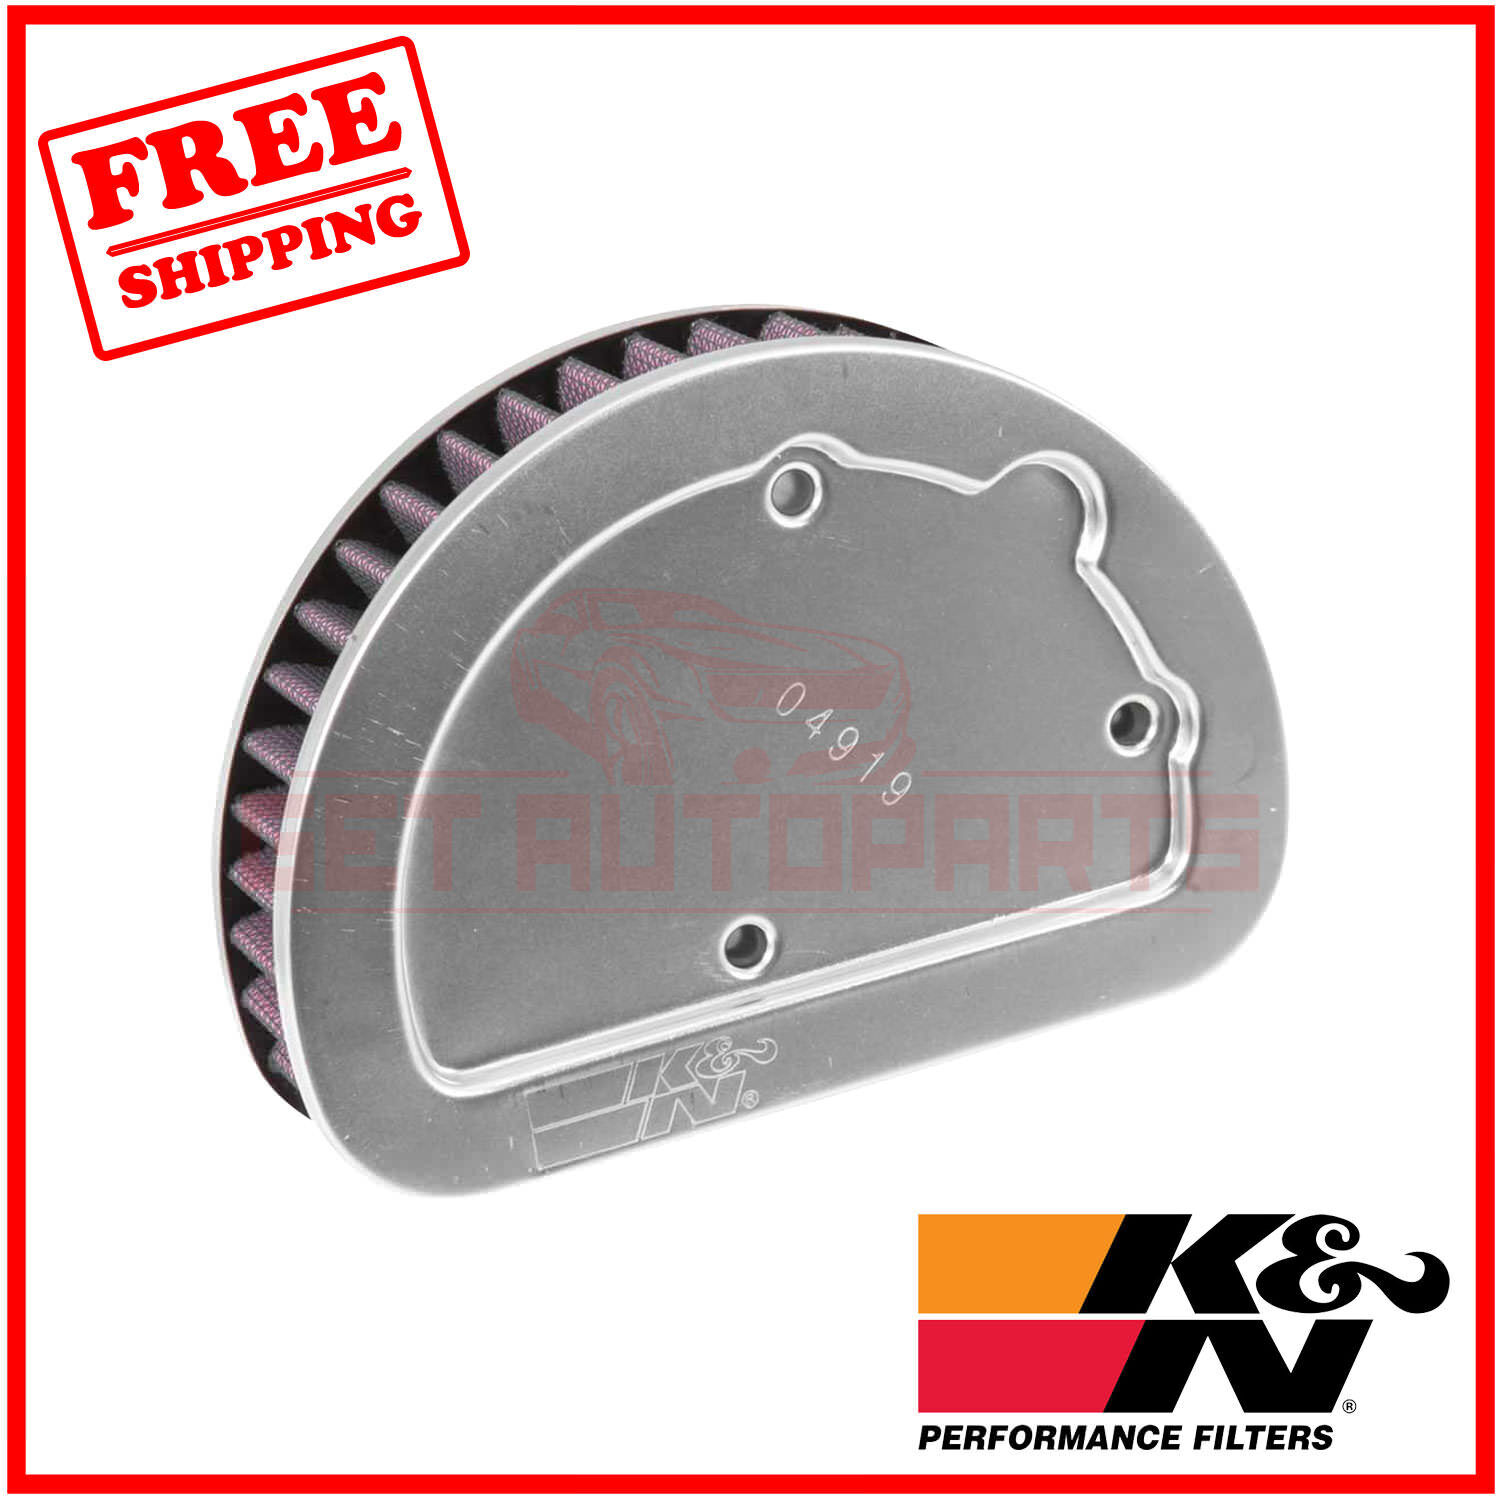 K&N Replacement Air Filter for Harley Davidson FLSTN Softail Deluxe 2016-17